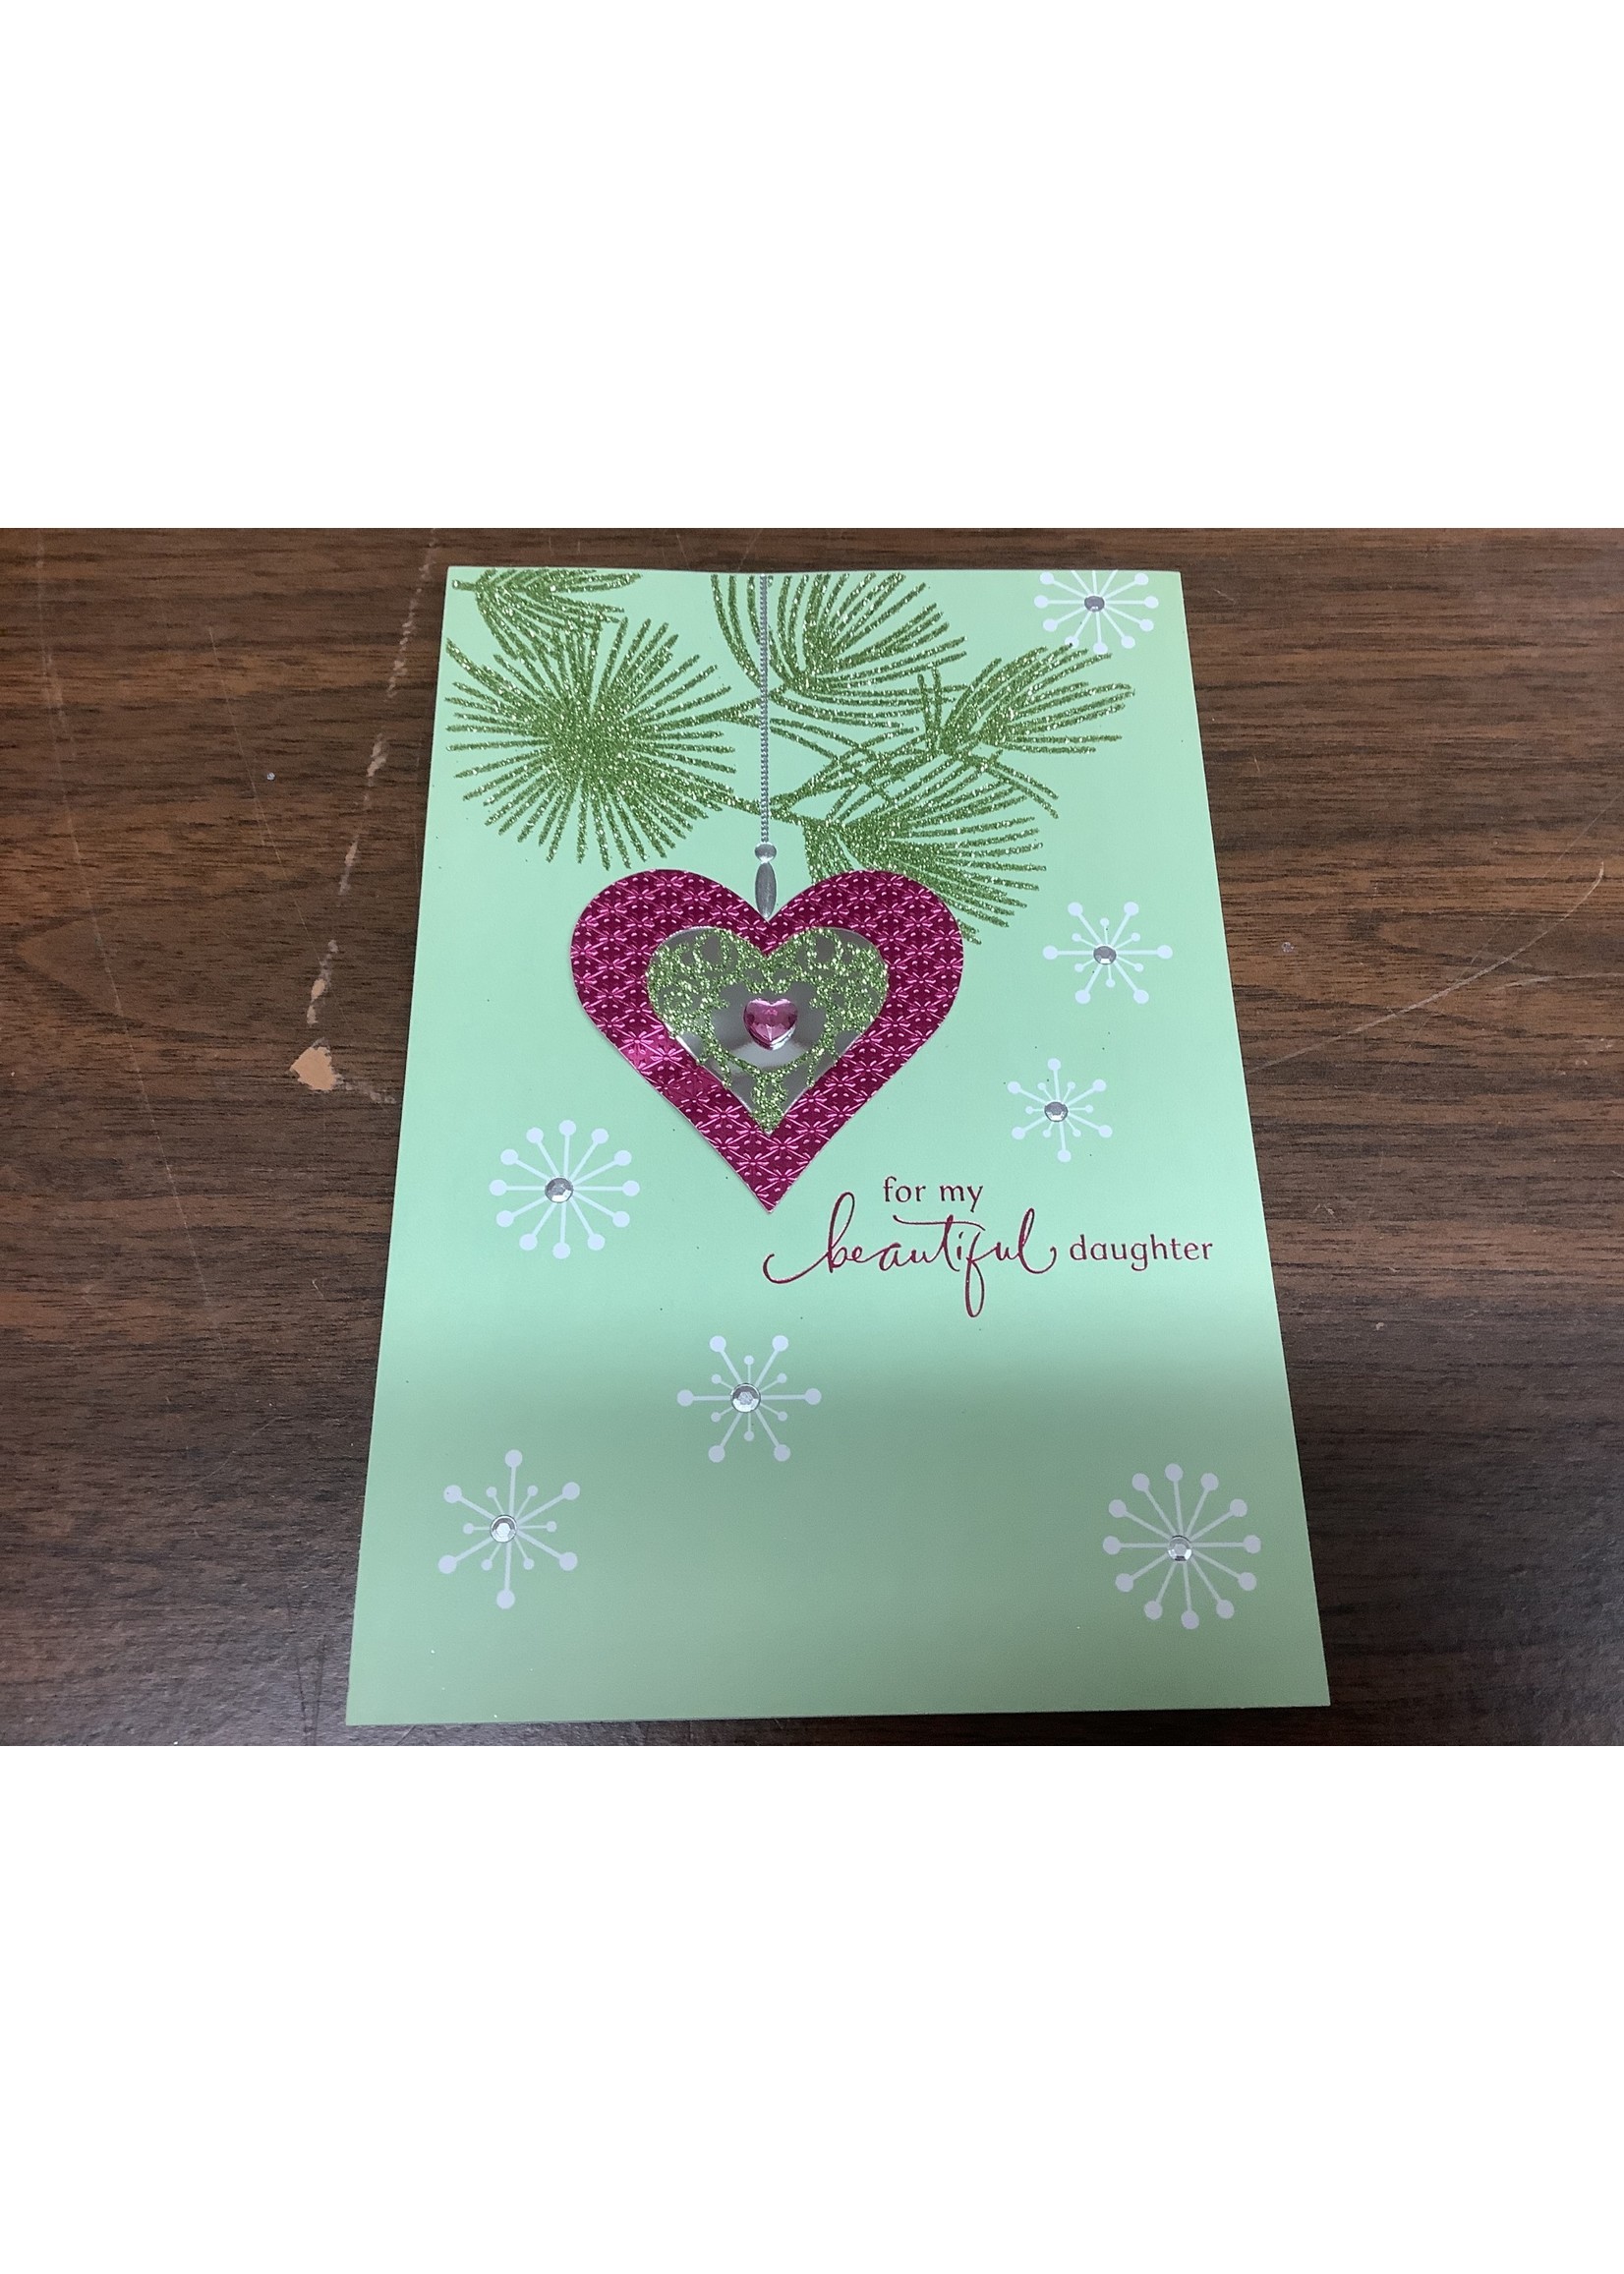 Hallmark Packaged Christmas Card “for my Daughter”